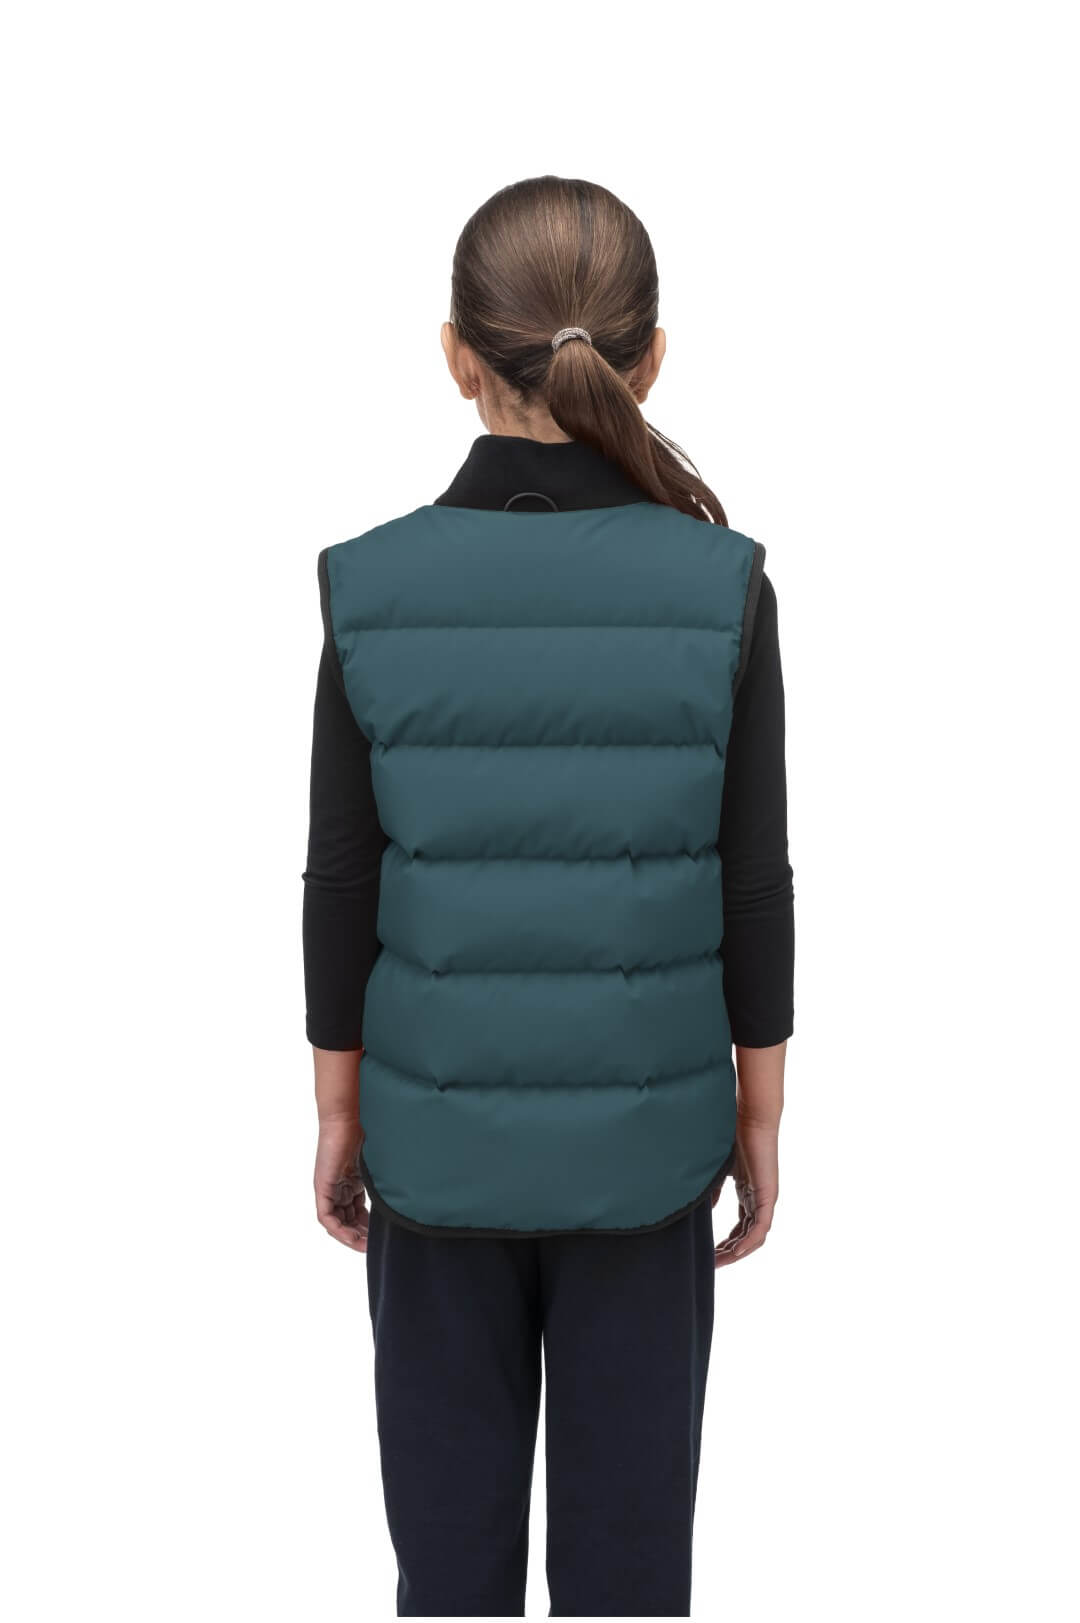 Little Pluto Kids Mid Layer Vest in hip length, Canadian duck down insulation, ribbed collar, two-way front zipper, and quilted body, in Pine